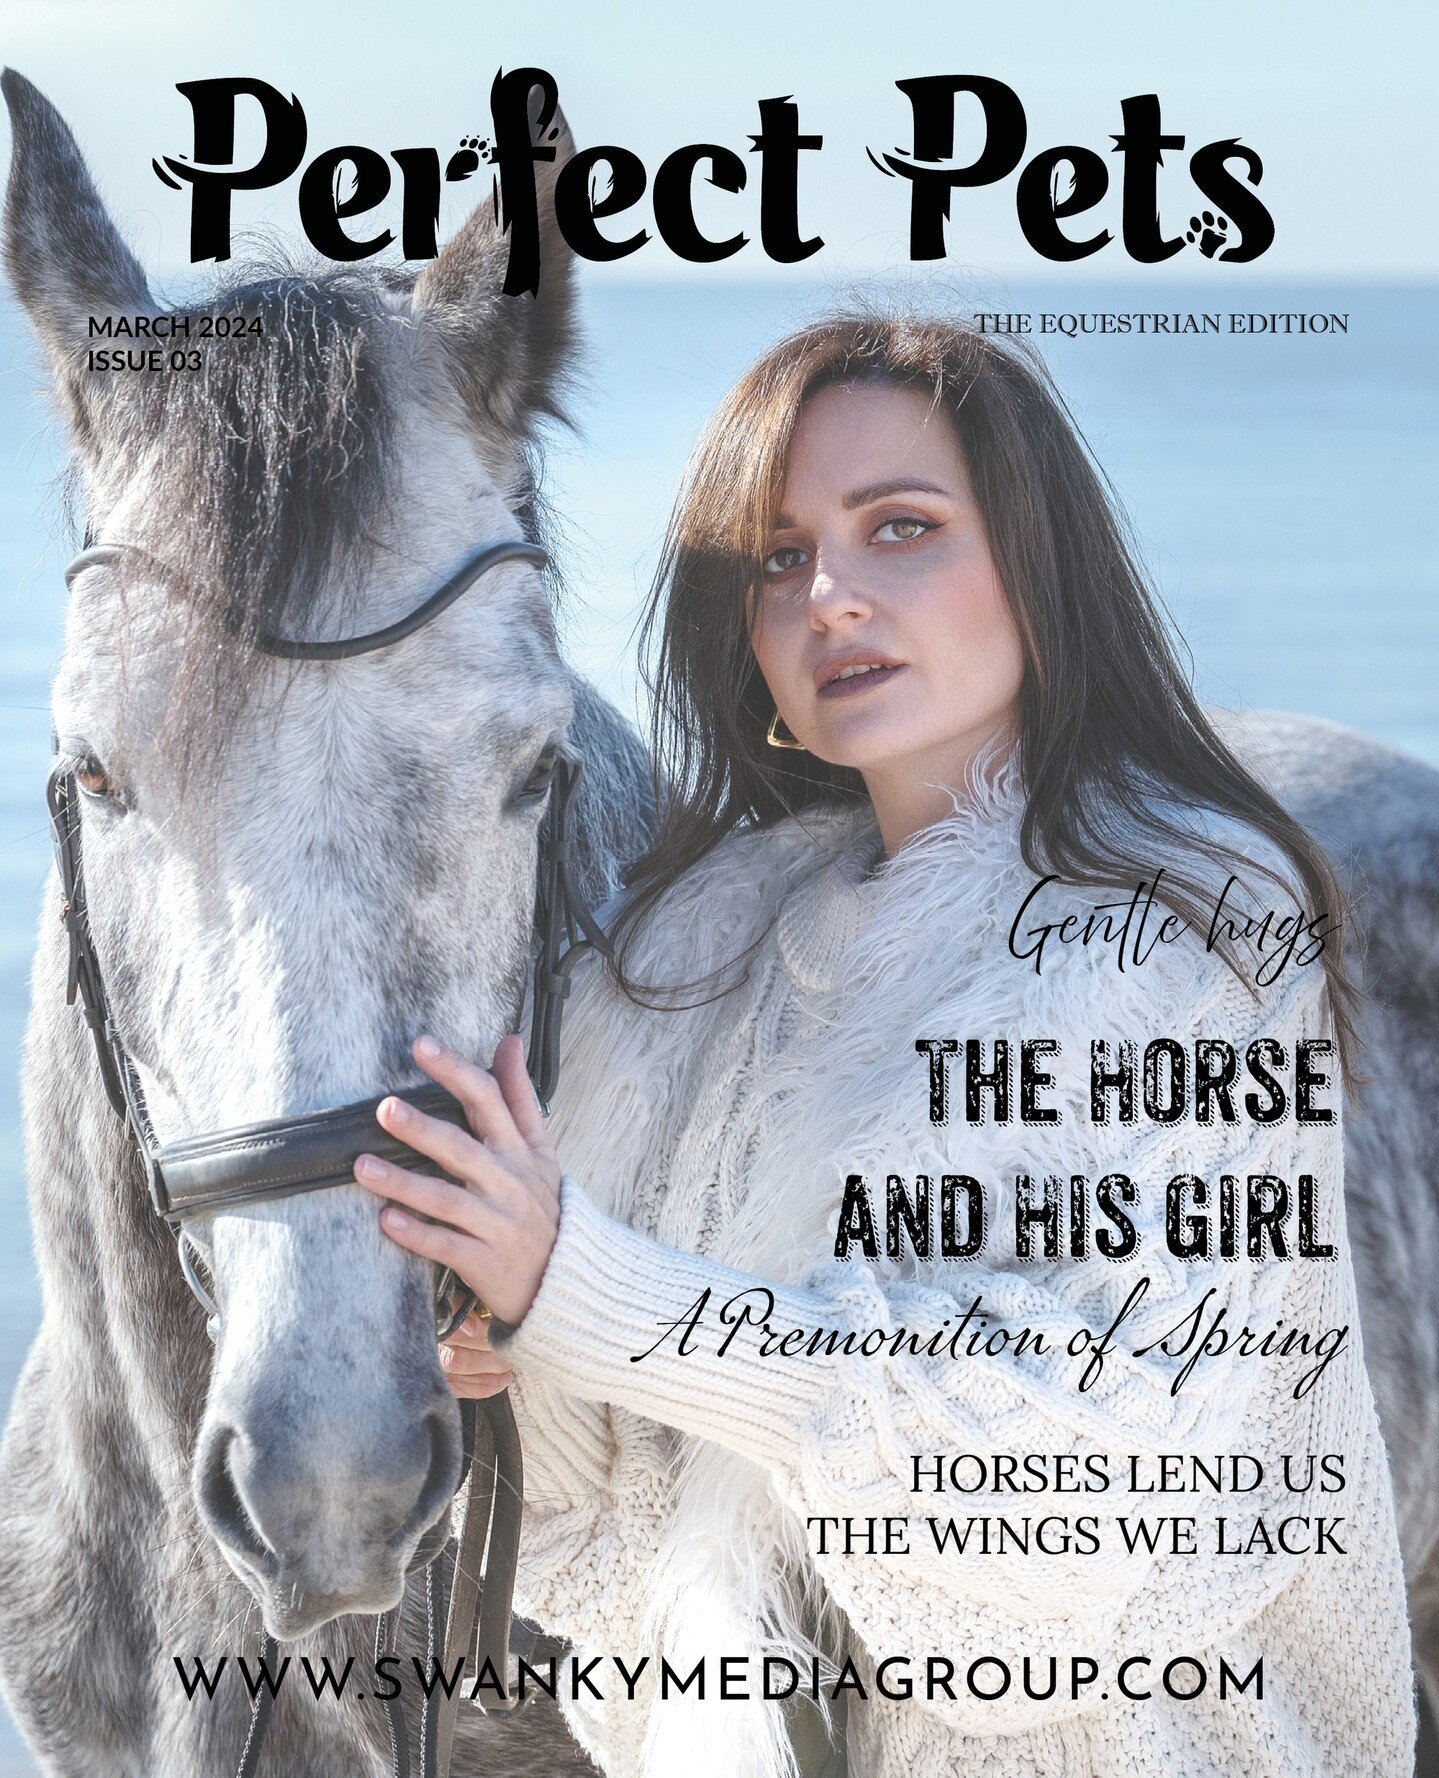 OUR MARCH ISSUES HAVE ARRIVED 💙⁠
⁠
Perfect Pets Magazine - March 2024: The Equestrian Edition Issue 3⁠
⁠
Front cover: The Horse and His Girl. A Premonition of Spring⁠
⁠
Wardrobe Stylist/Photographer: Natalia Shelest⁠
IG: @natalia.shelest.photo⁠
WB: 